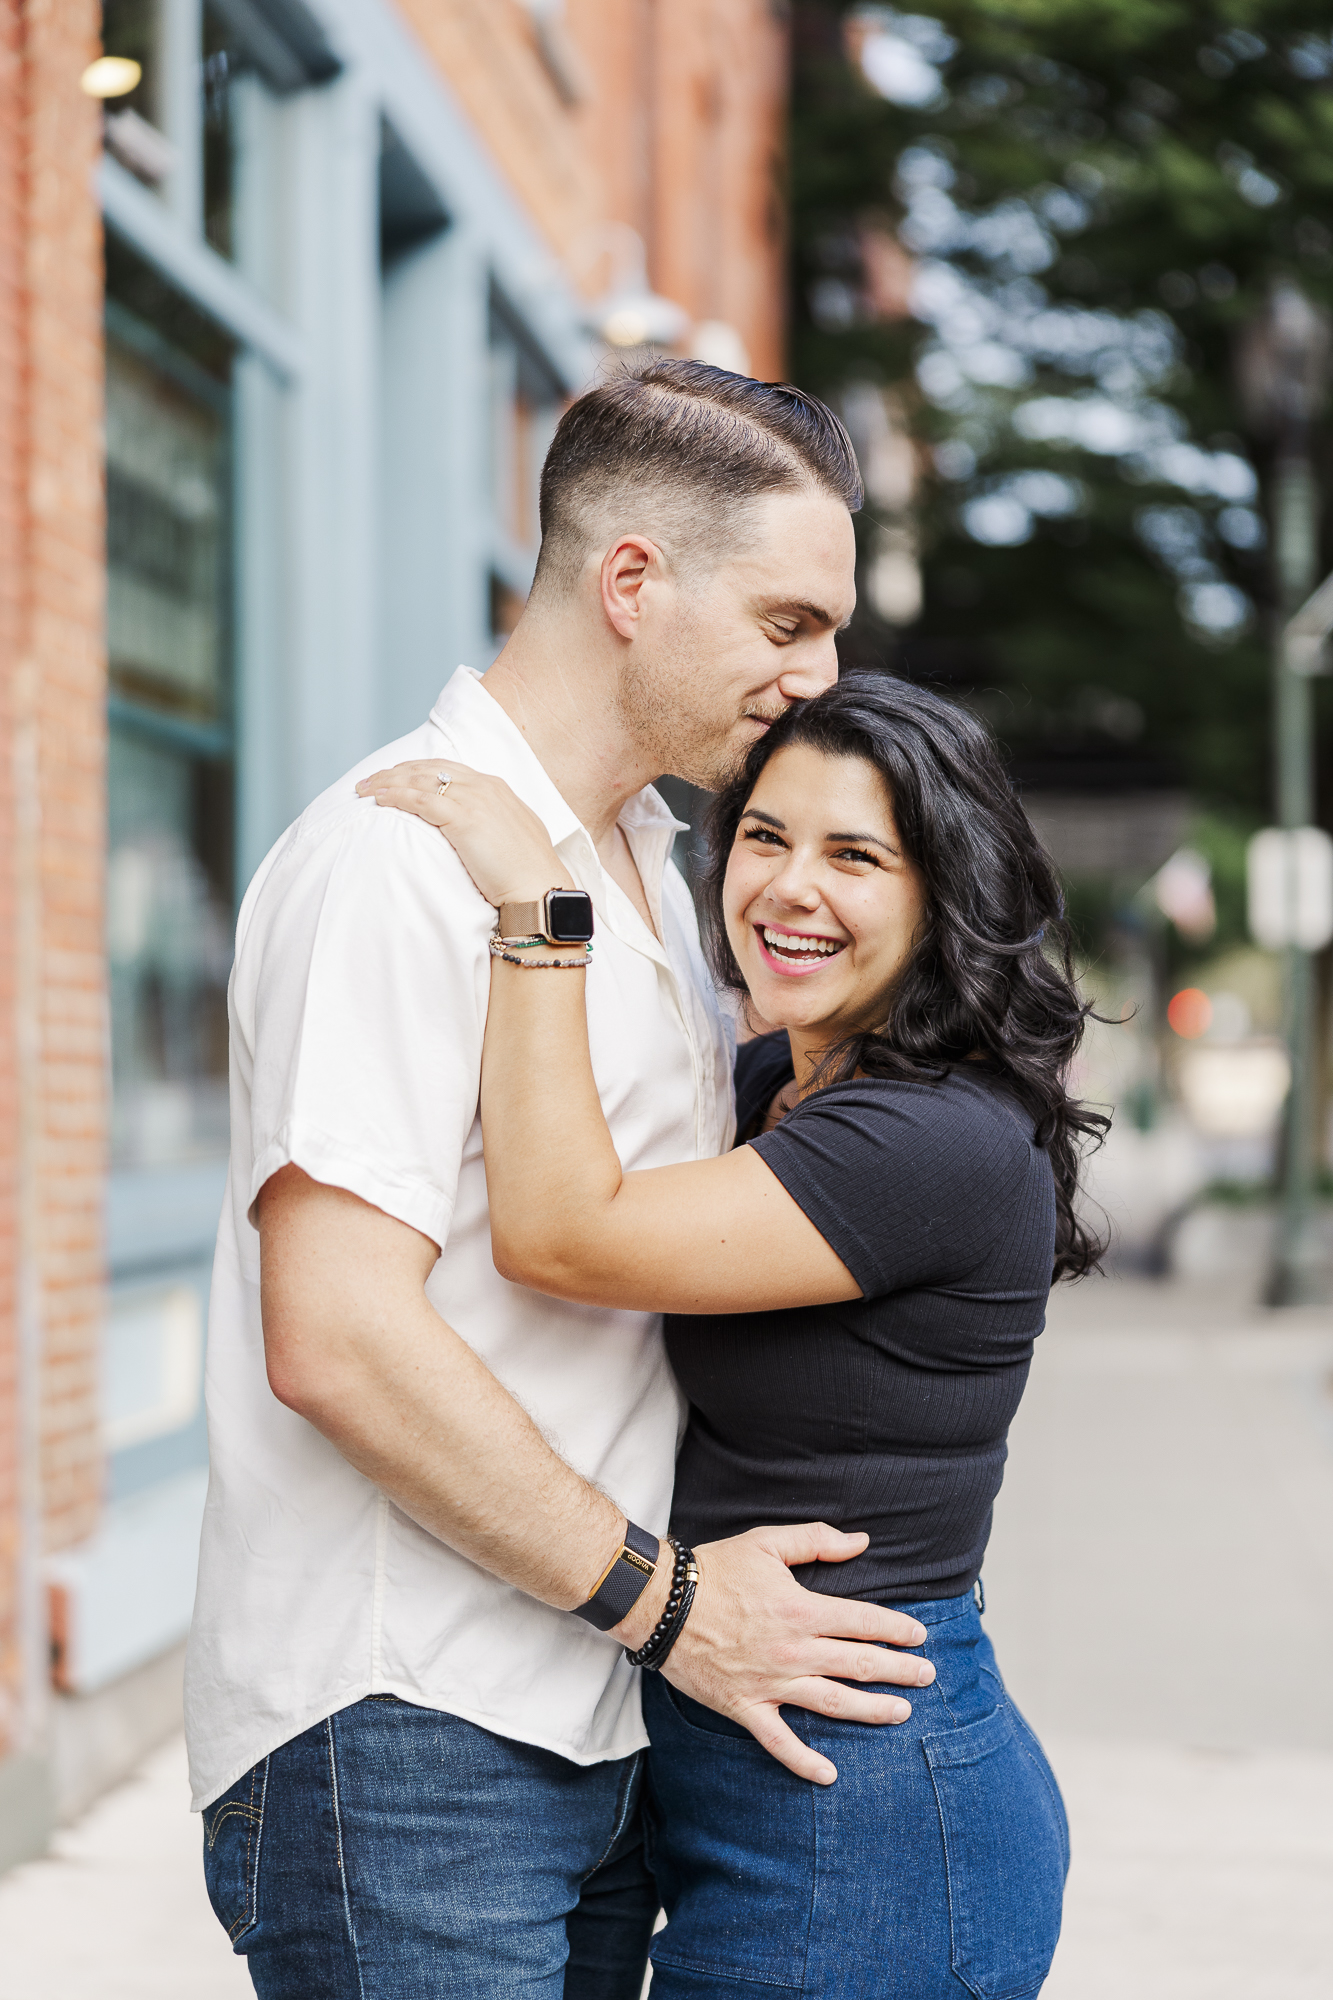 Sentimental Beacon Engagement Photos in Hudson Valley